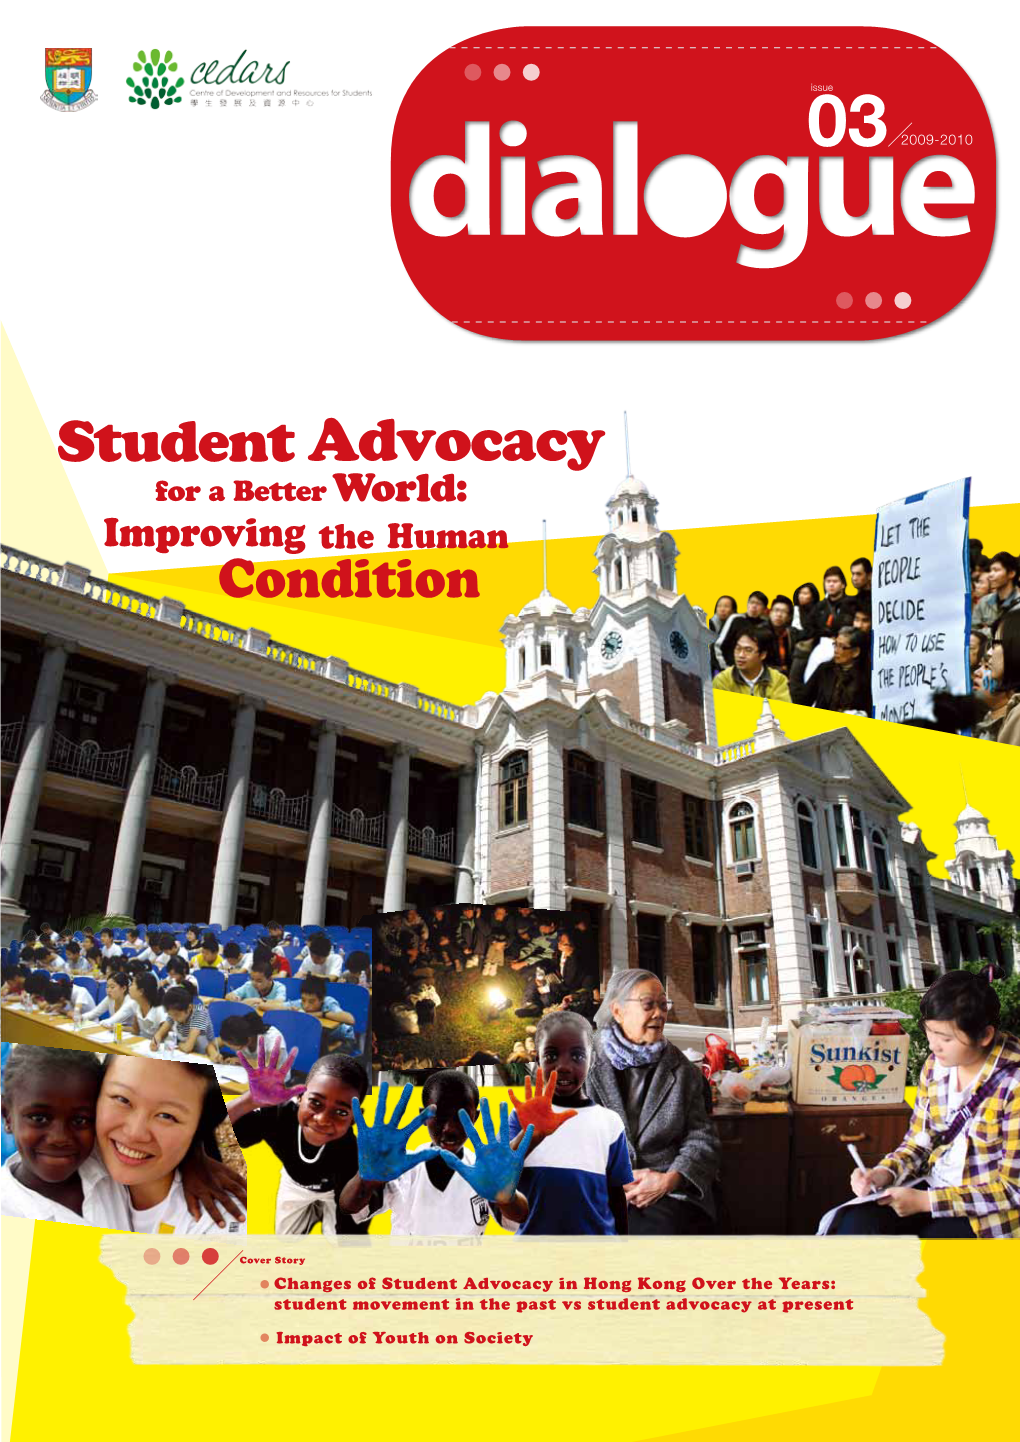 Impact of Youth on Society Changes of Student Advocacy in Hong Kong